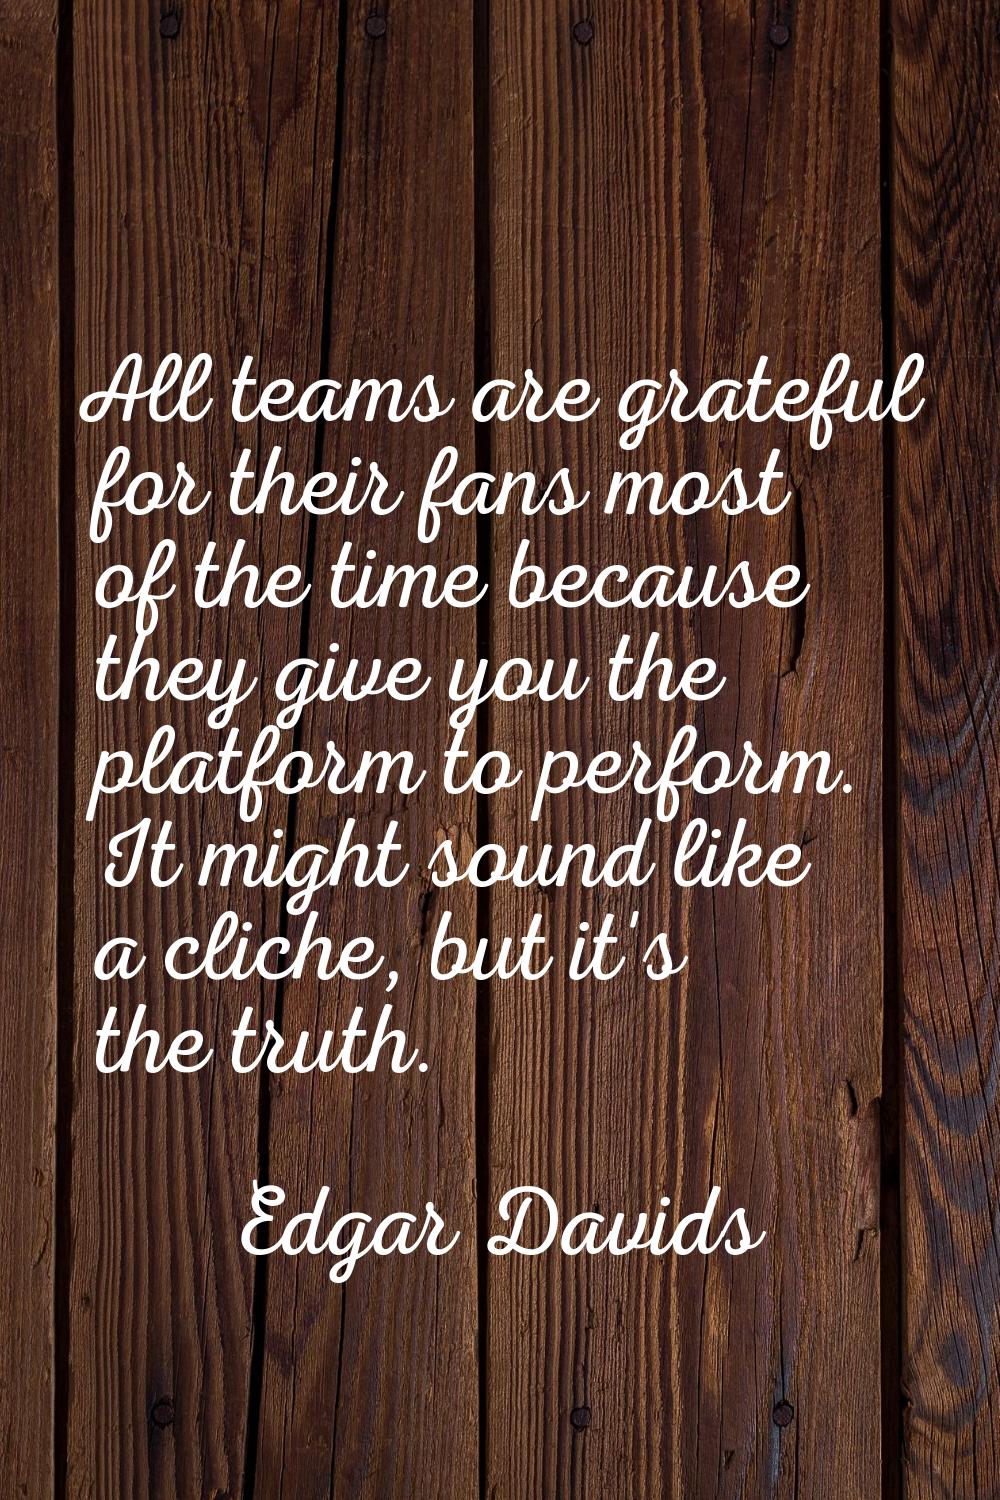 All teams are grateful for their fans most of the time because they give you the platform to perfor